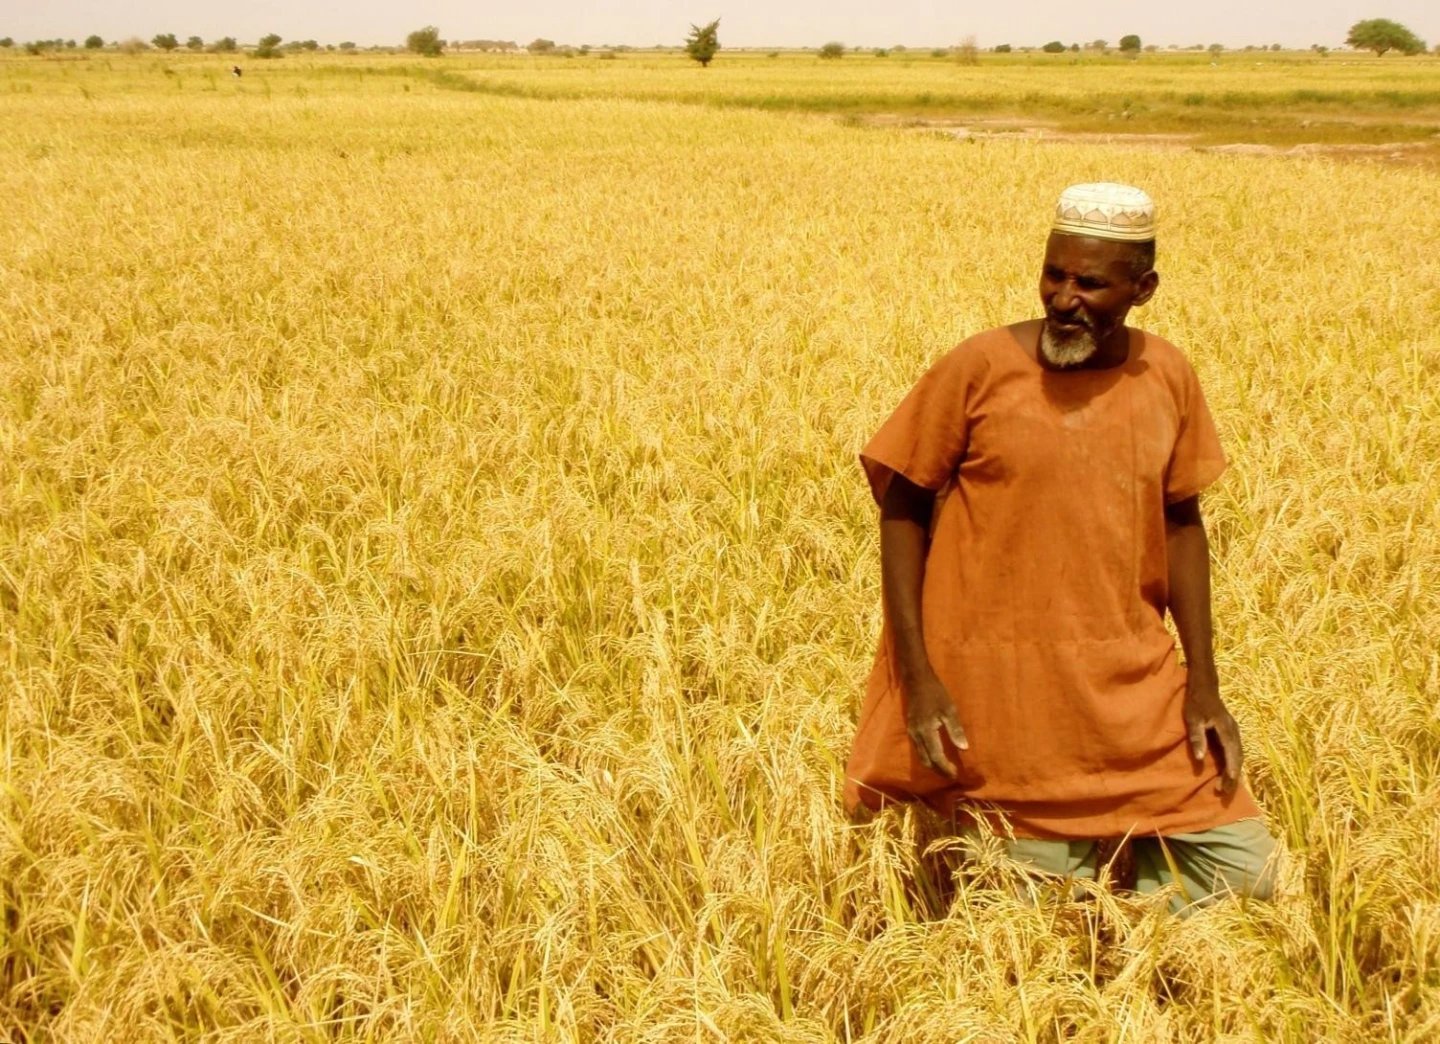 African farmer standing in a rice field